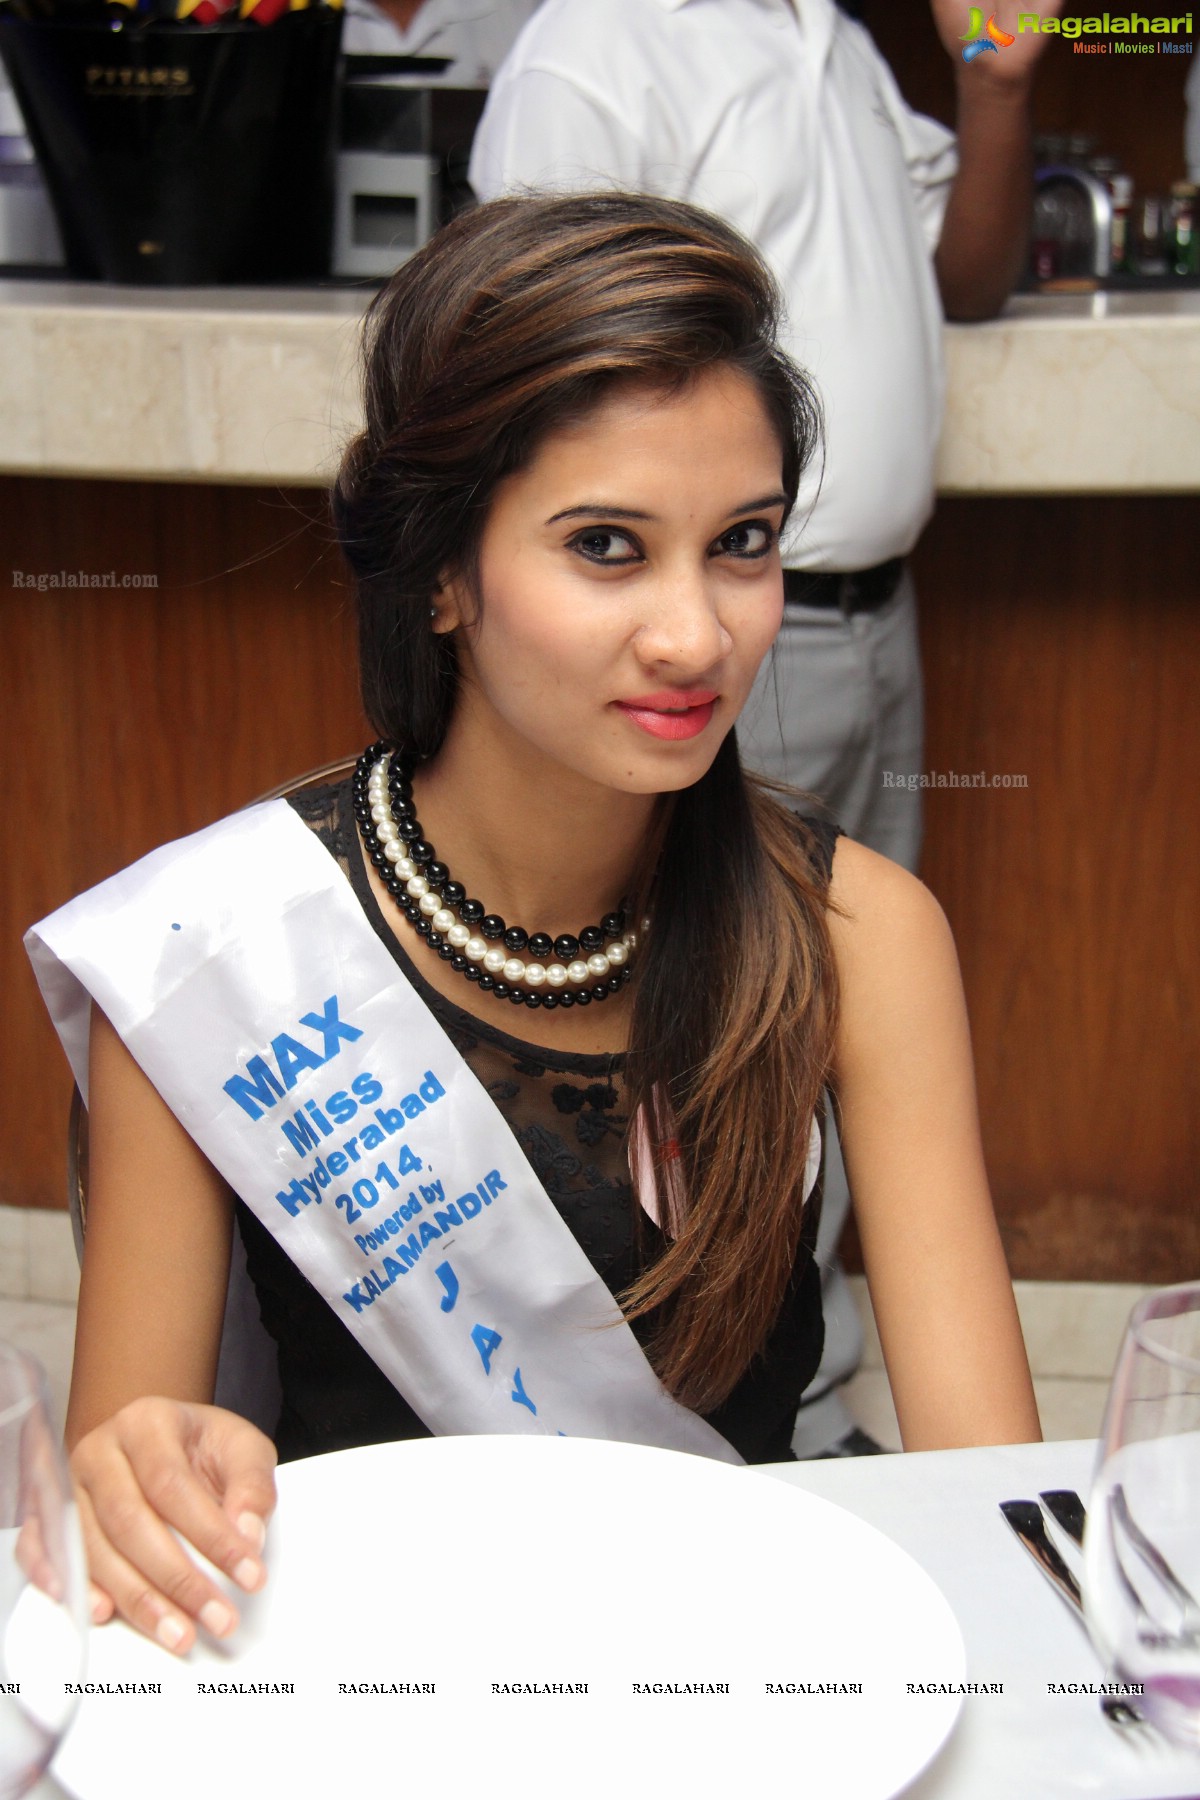 Miss Hyderabad Finalists 2014 at News Cafe, Hyderabad